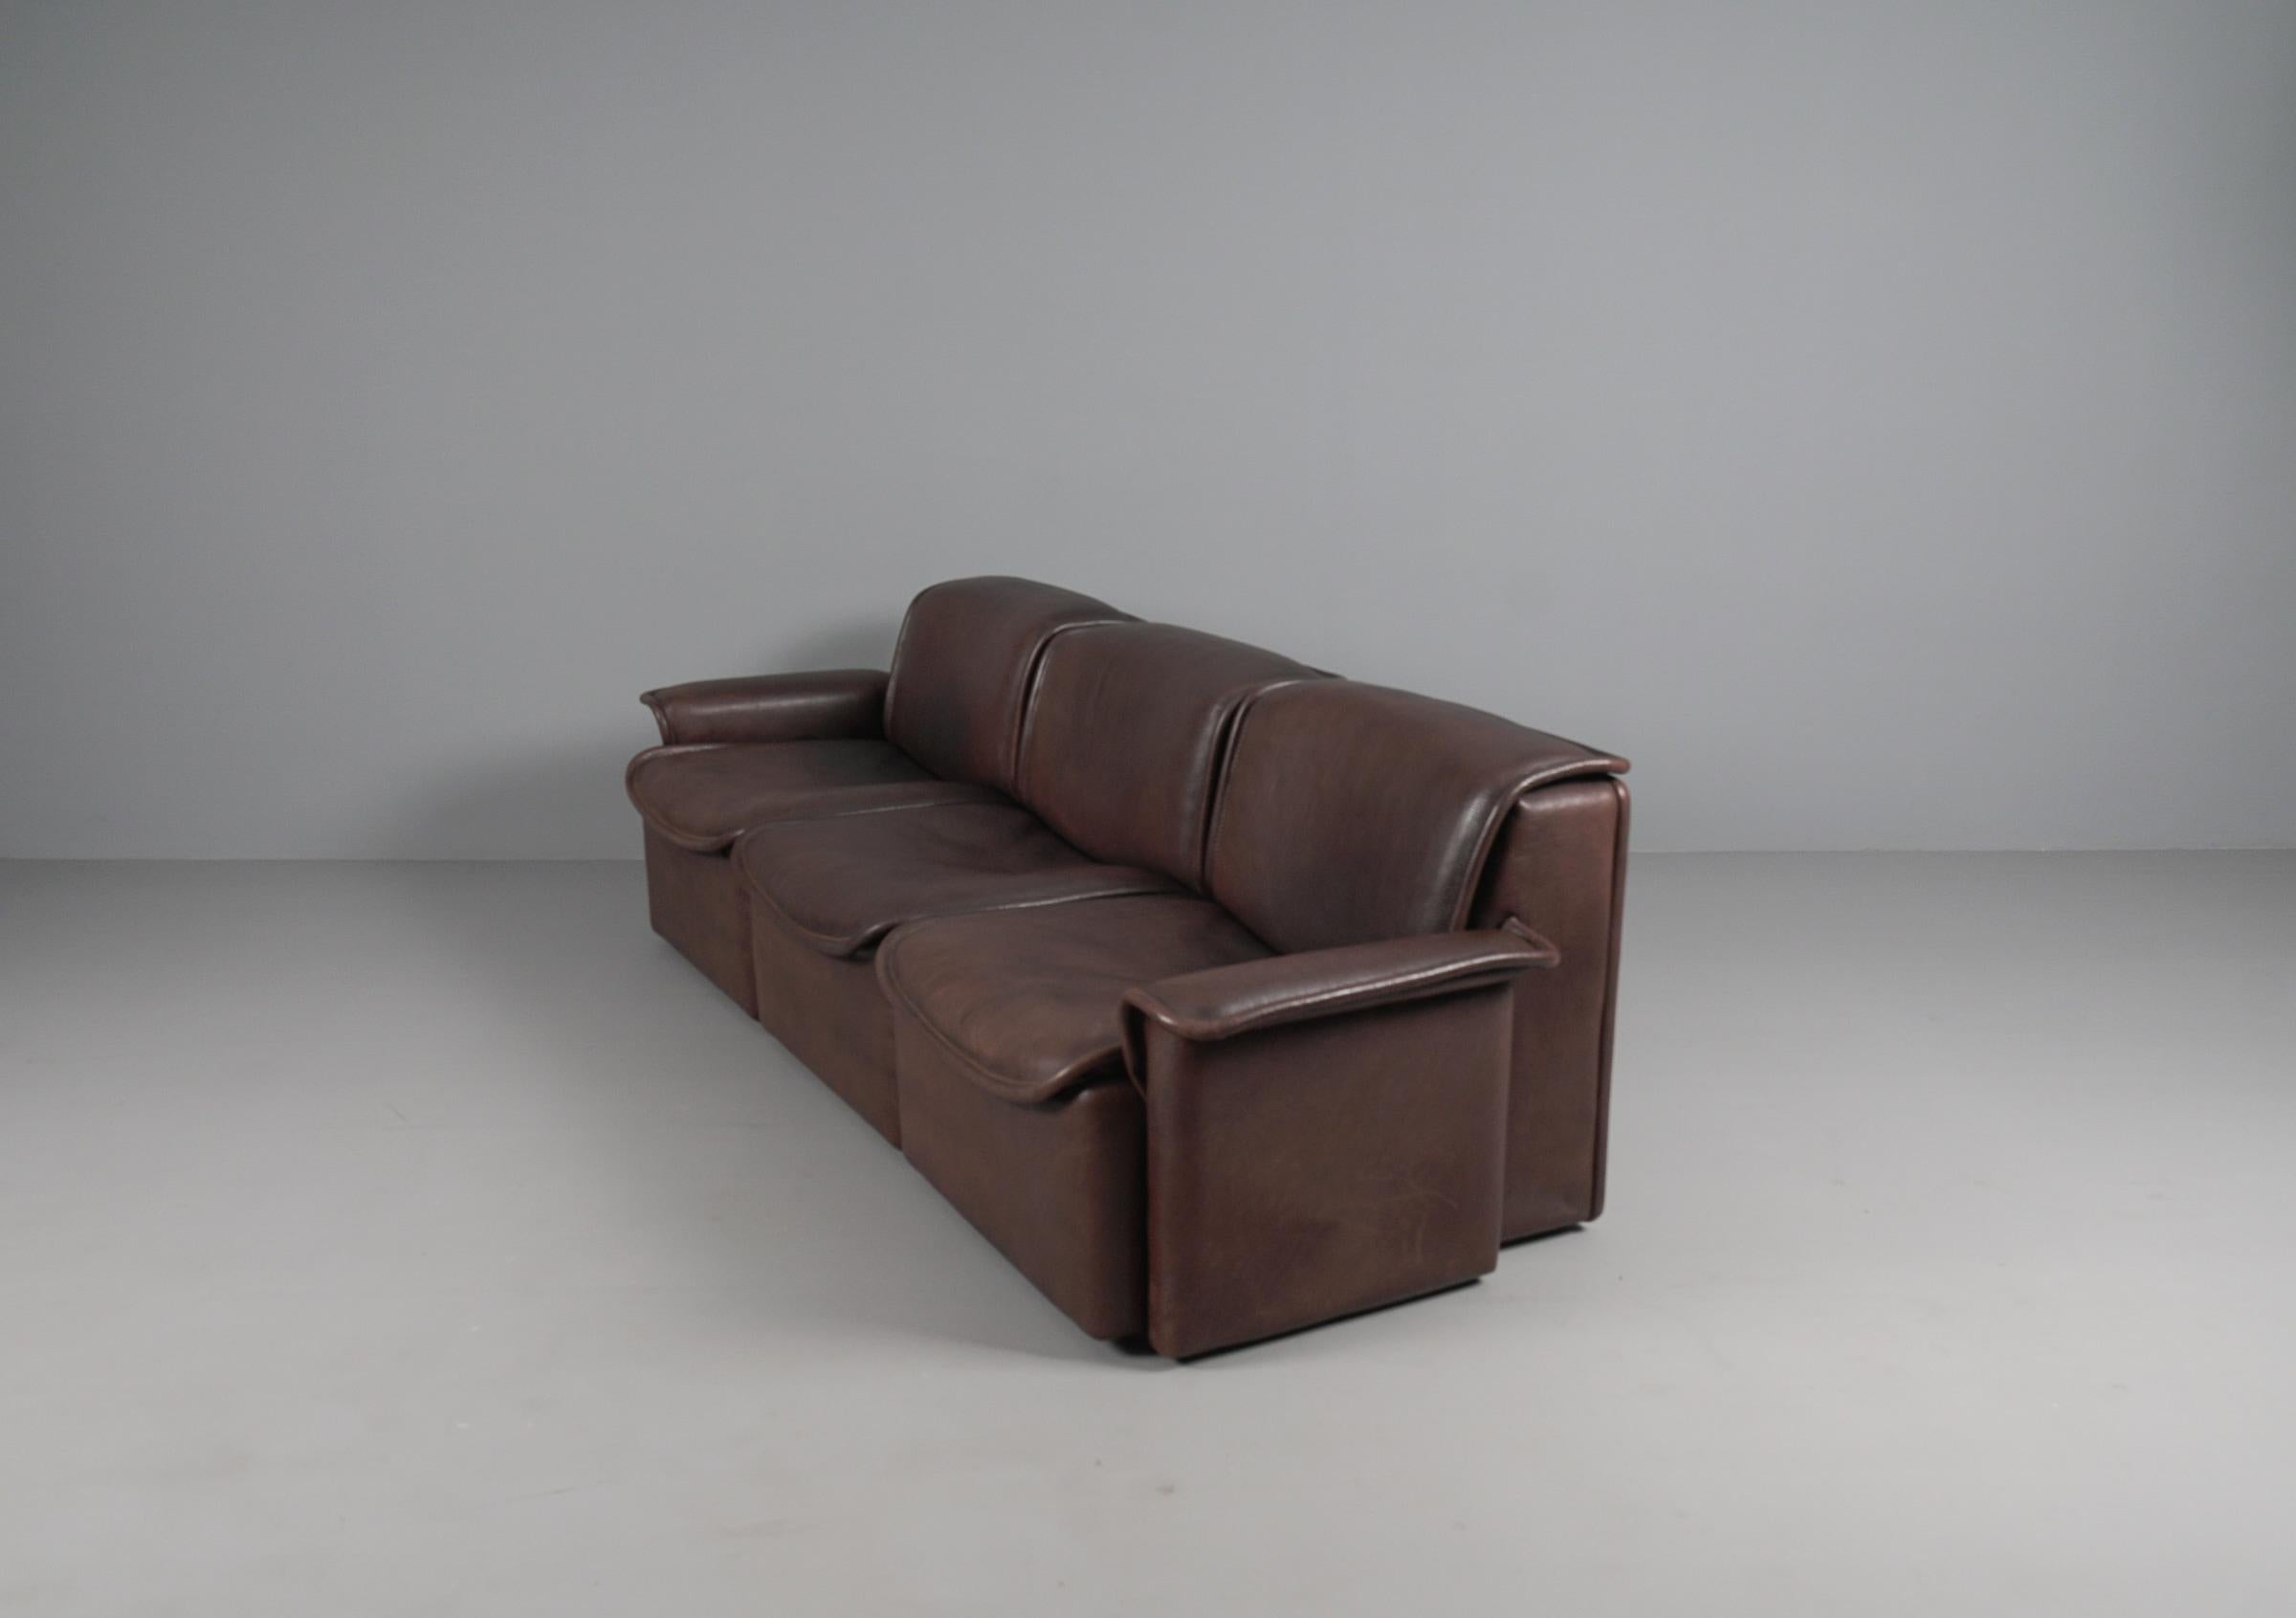 Swiss Three Seater Sofa by De Sede DS-12 in Brown Neck Leather, 1960s, Switzerland For Sale